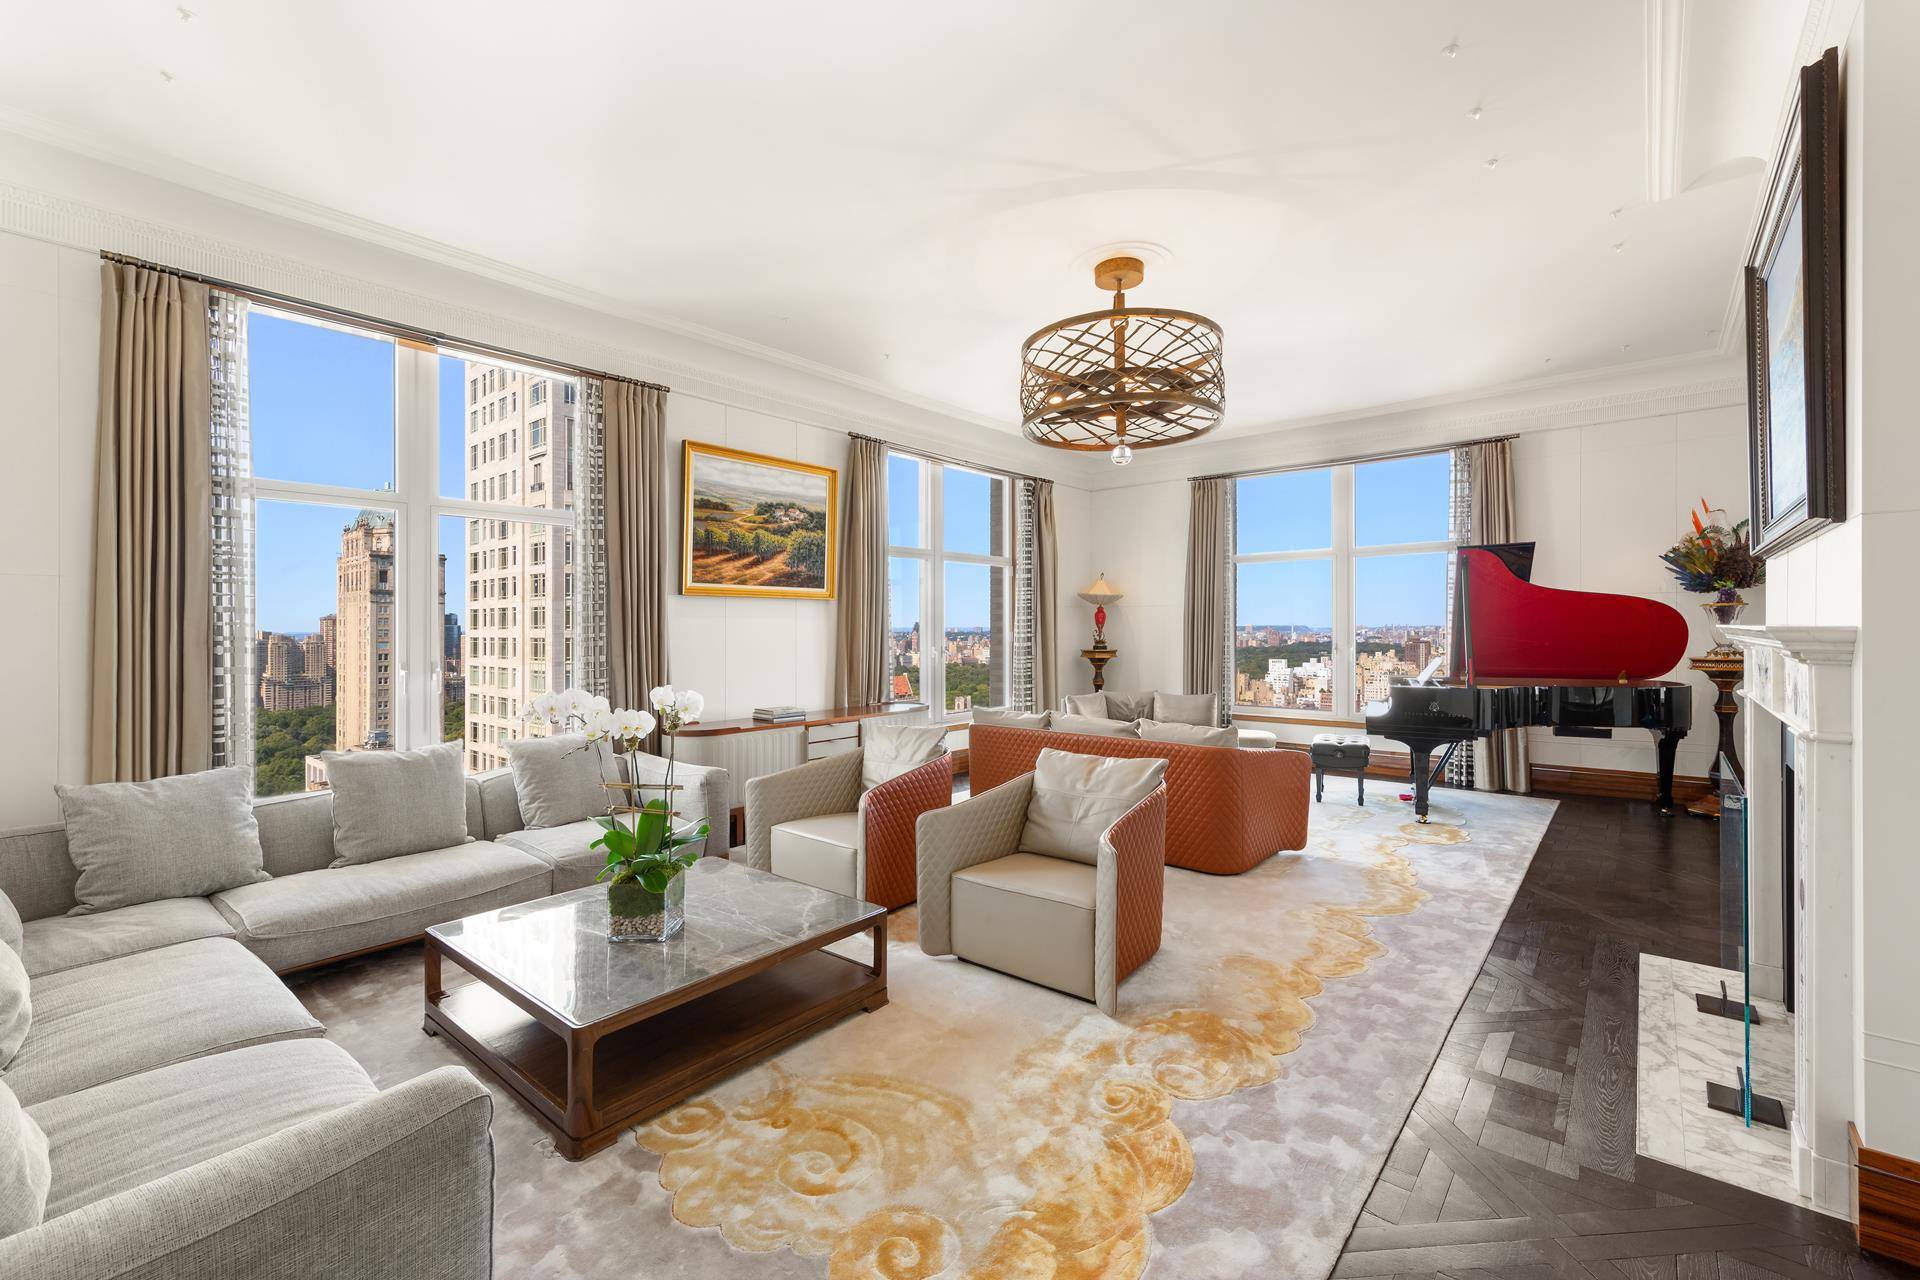 This stunning 5000 square foot duplex is comprised of the 36th and 37th floors of 515 Park Avenue, a white glove full service limestone condominium.